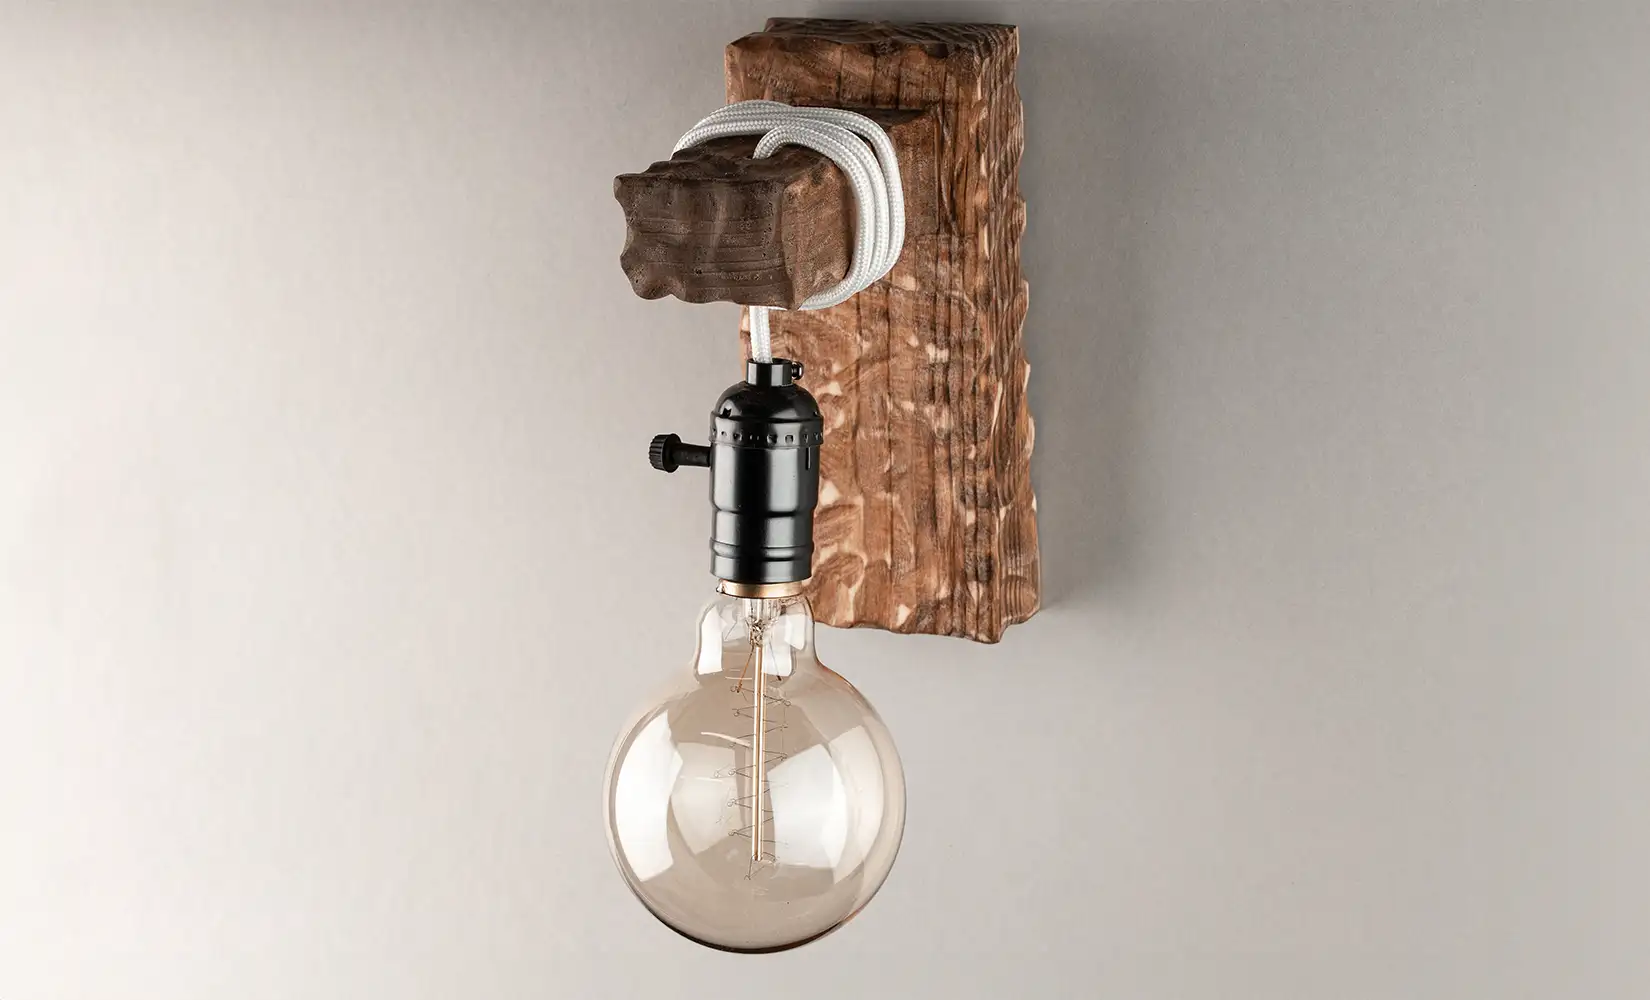 Wooden wall sconce lighting decor with Edison bulb attached.